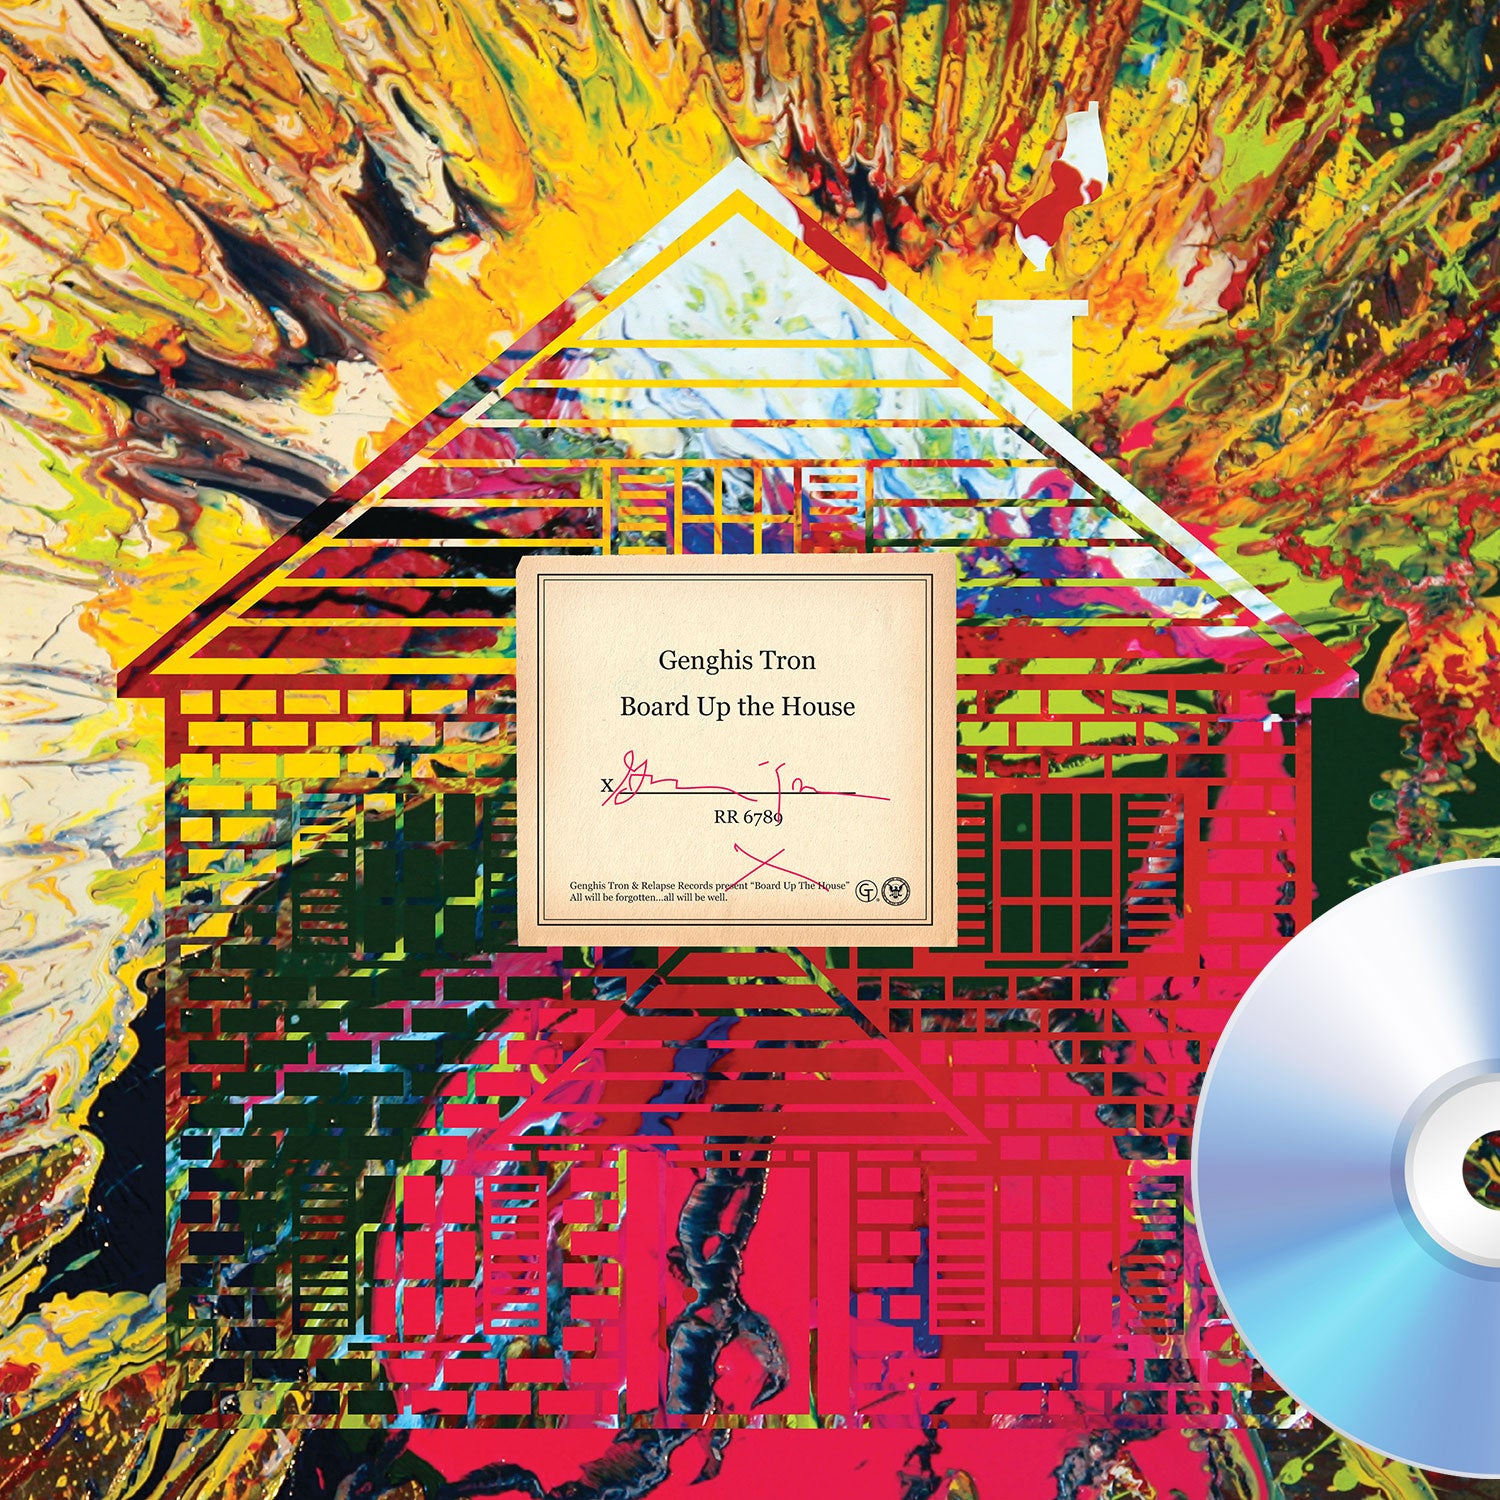 Genghis Tron "Board Up The House" CD